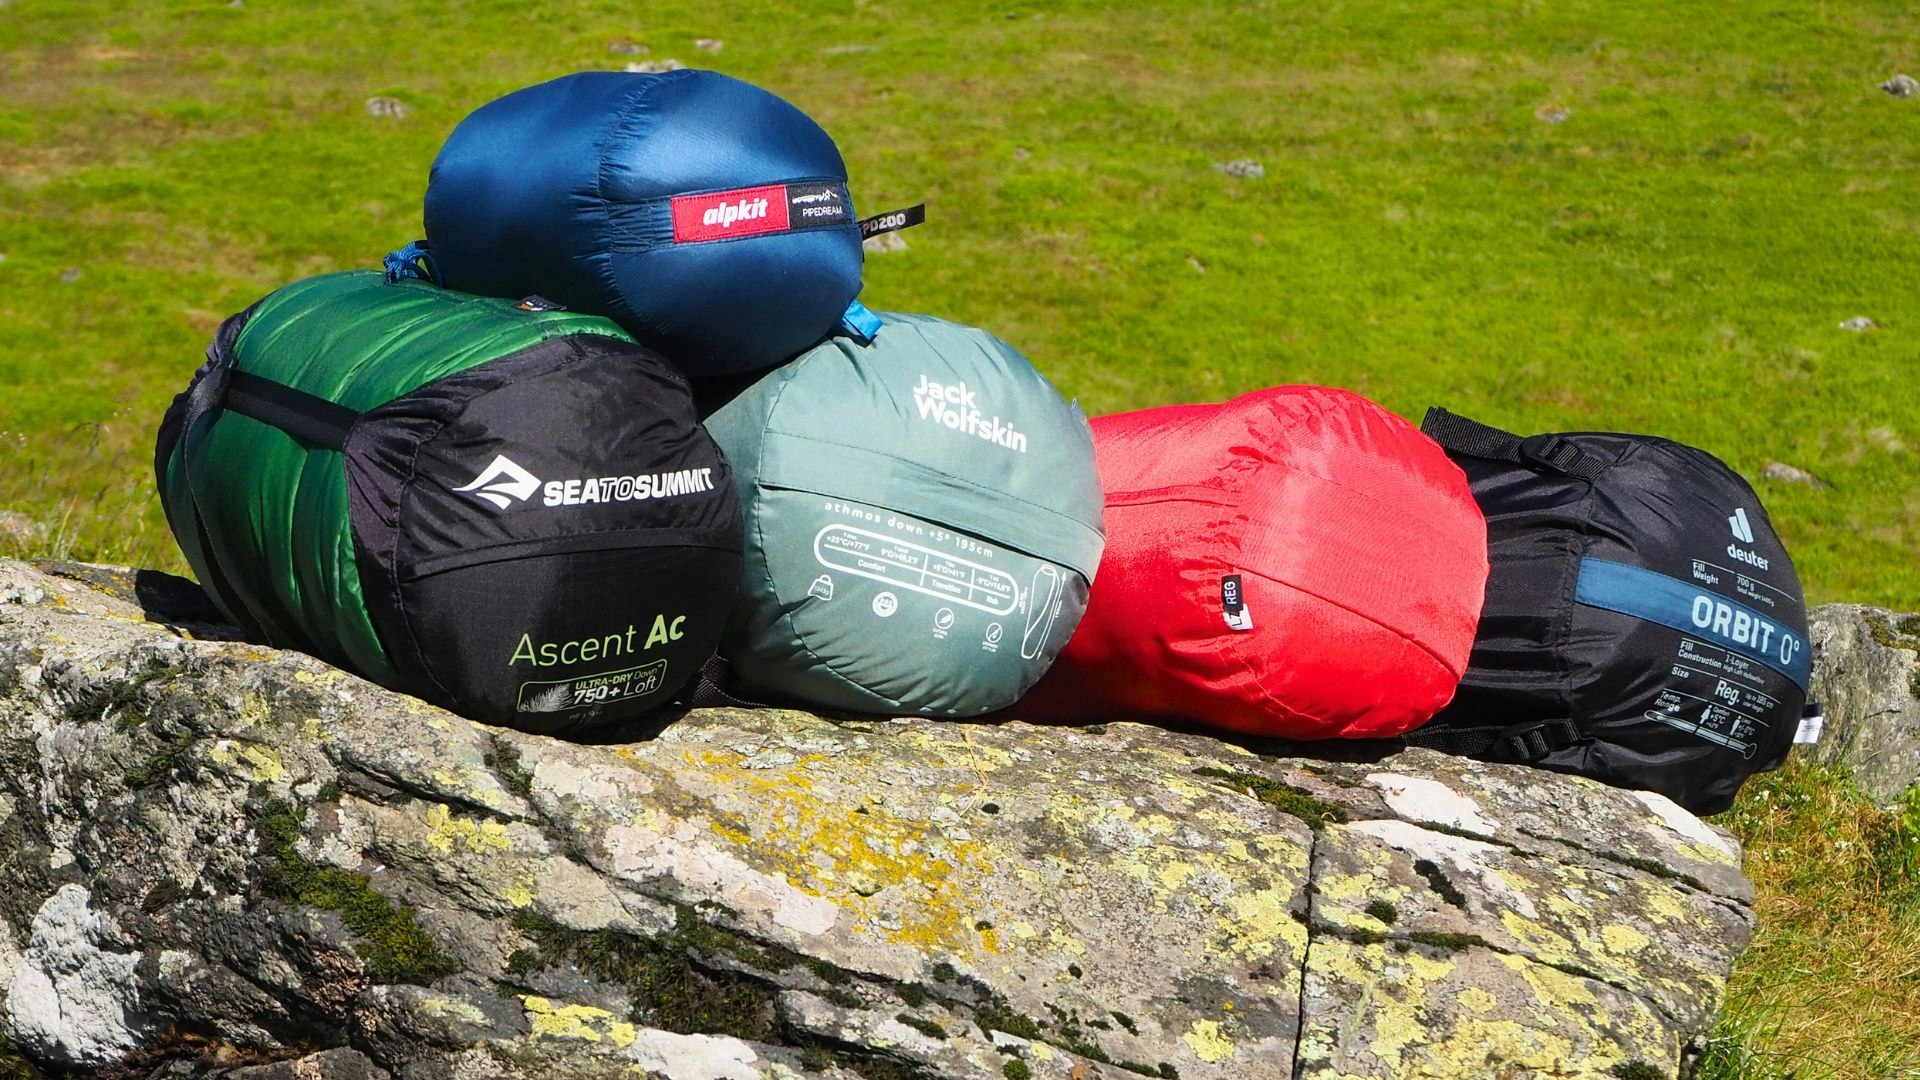 5 sleeping bags in compression sacks stacked on a rock